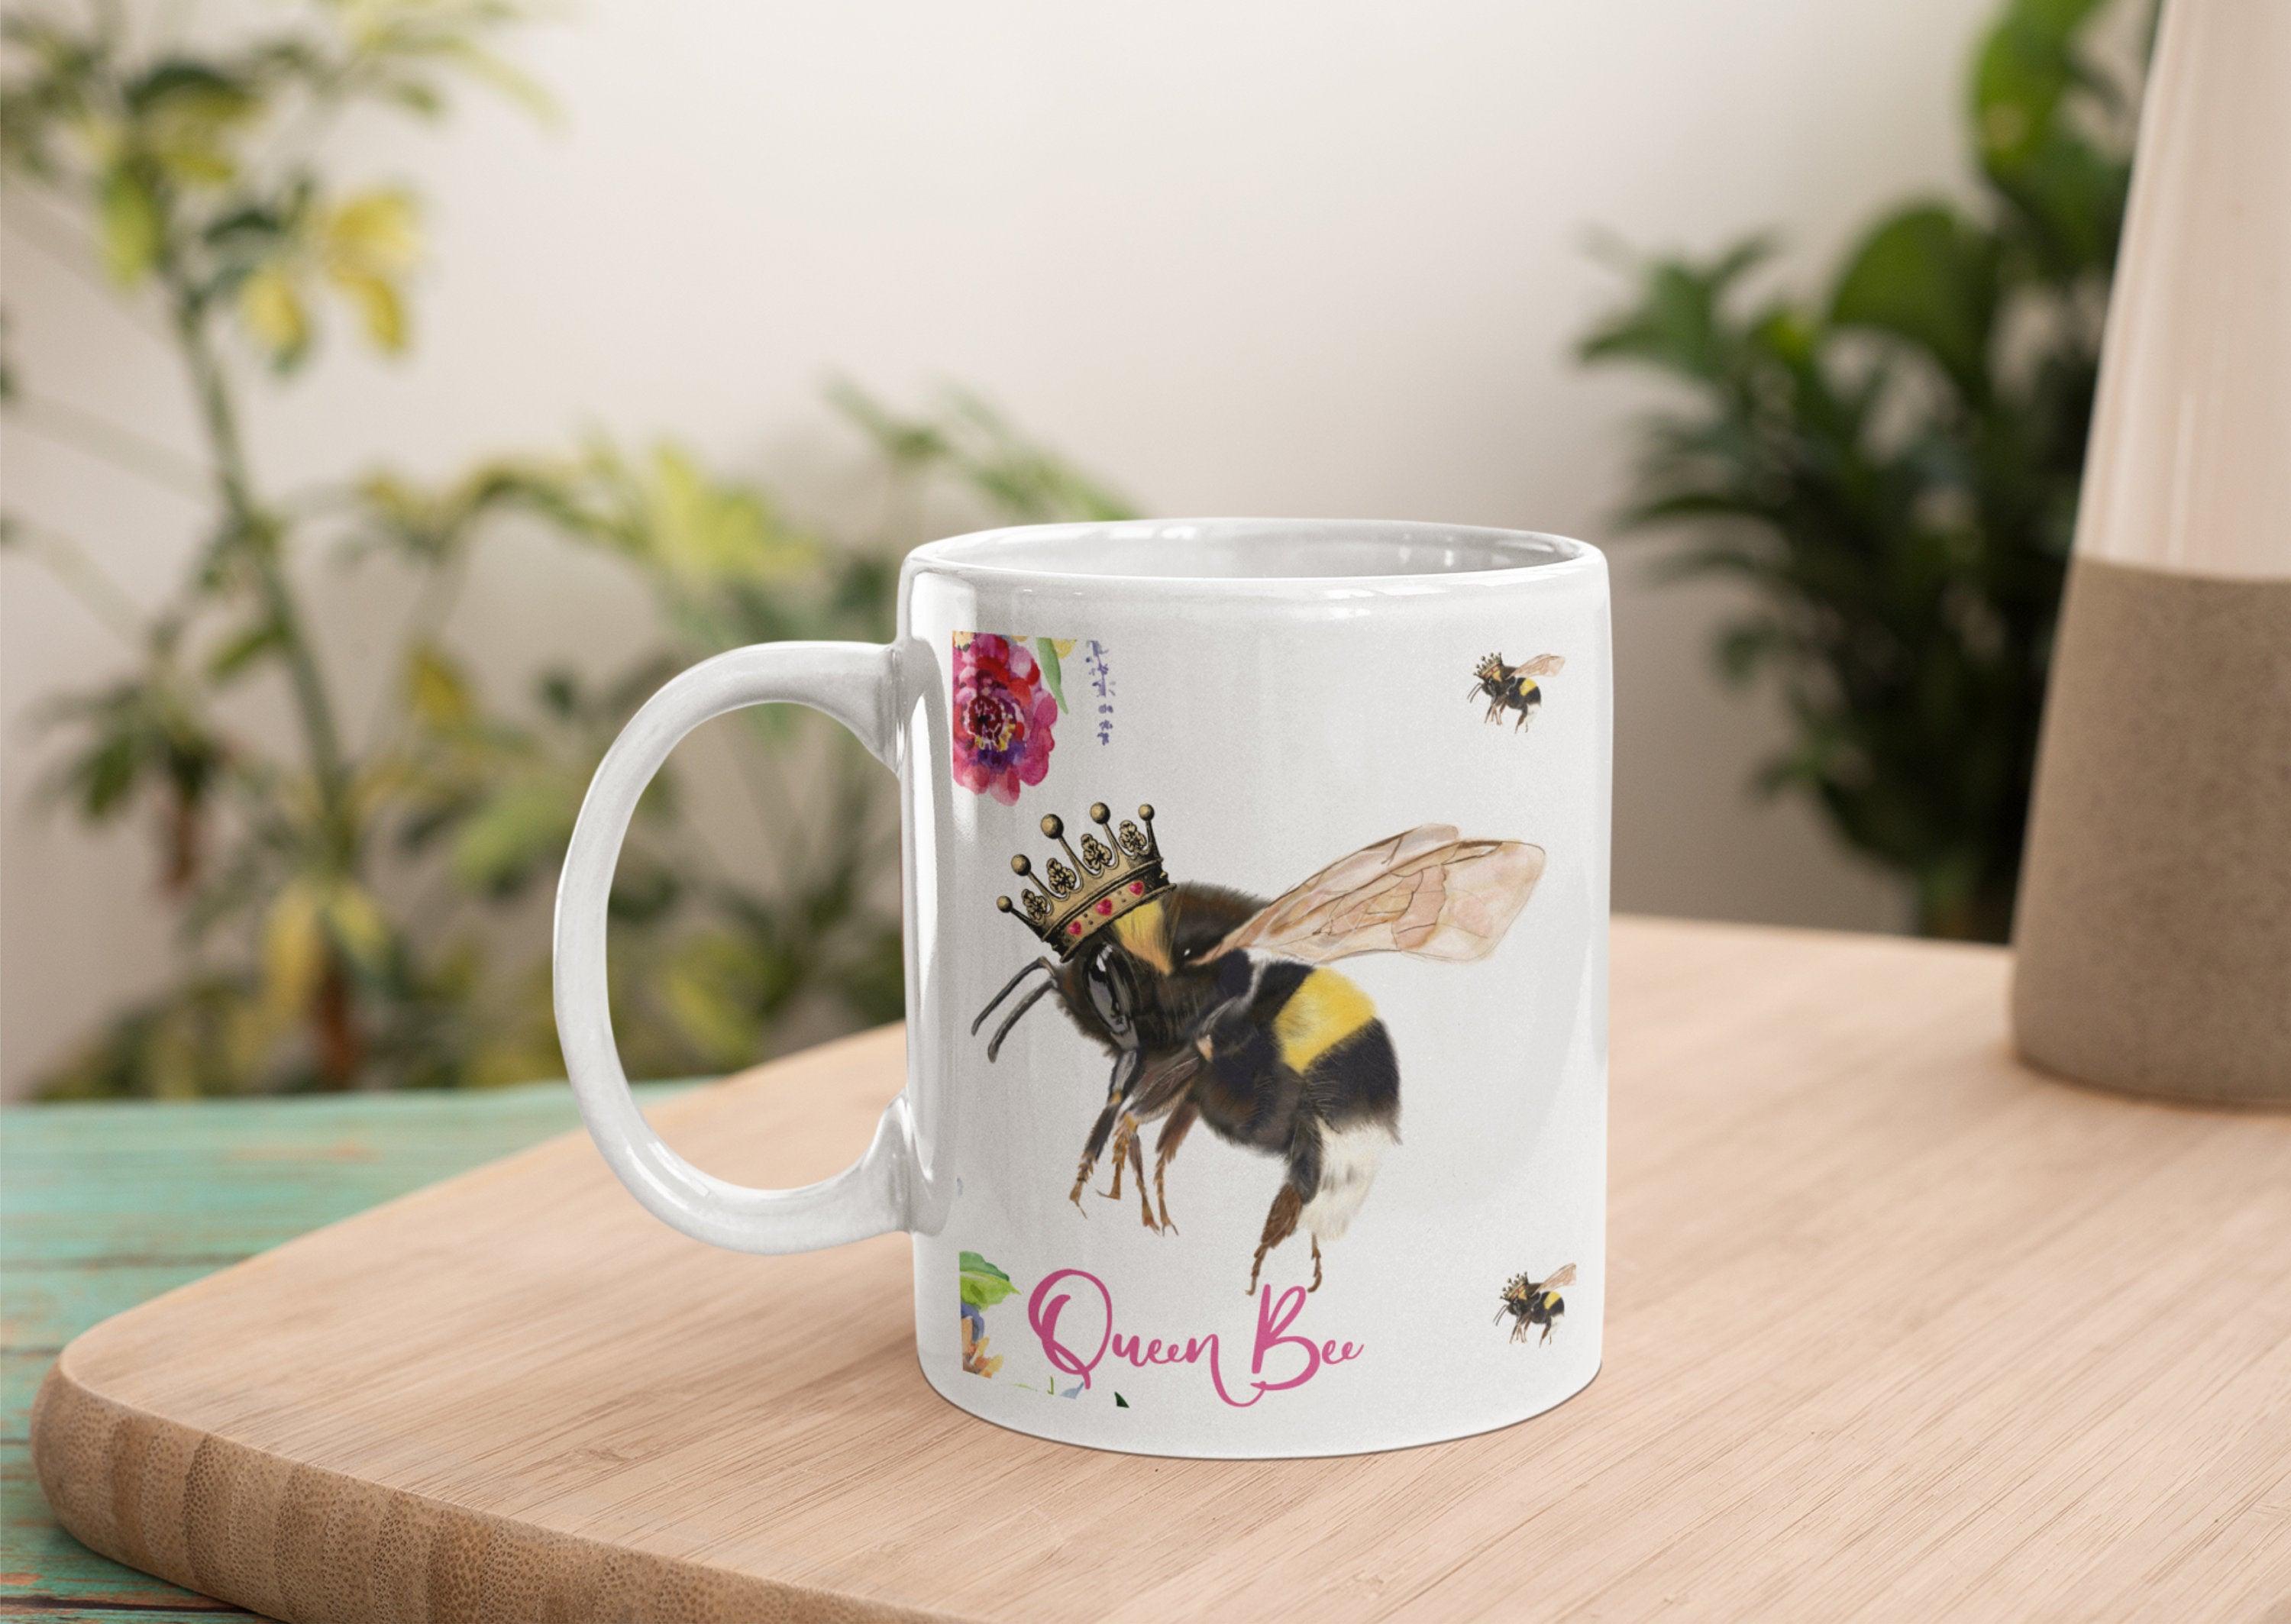 QUEEN BEE - Bumblebee colourful Coffee / Tea mug - birthday gift -personalised mug- Bee lover - New Home gift - His and hers